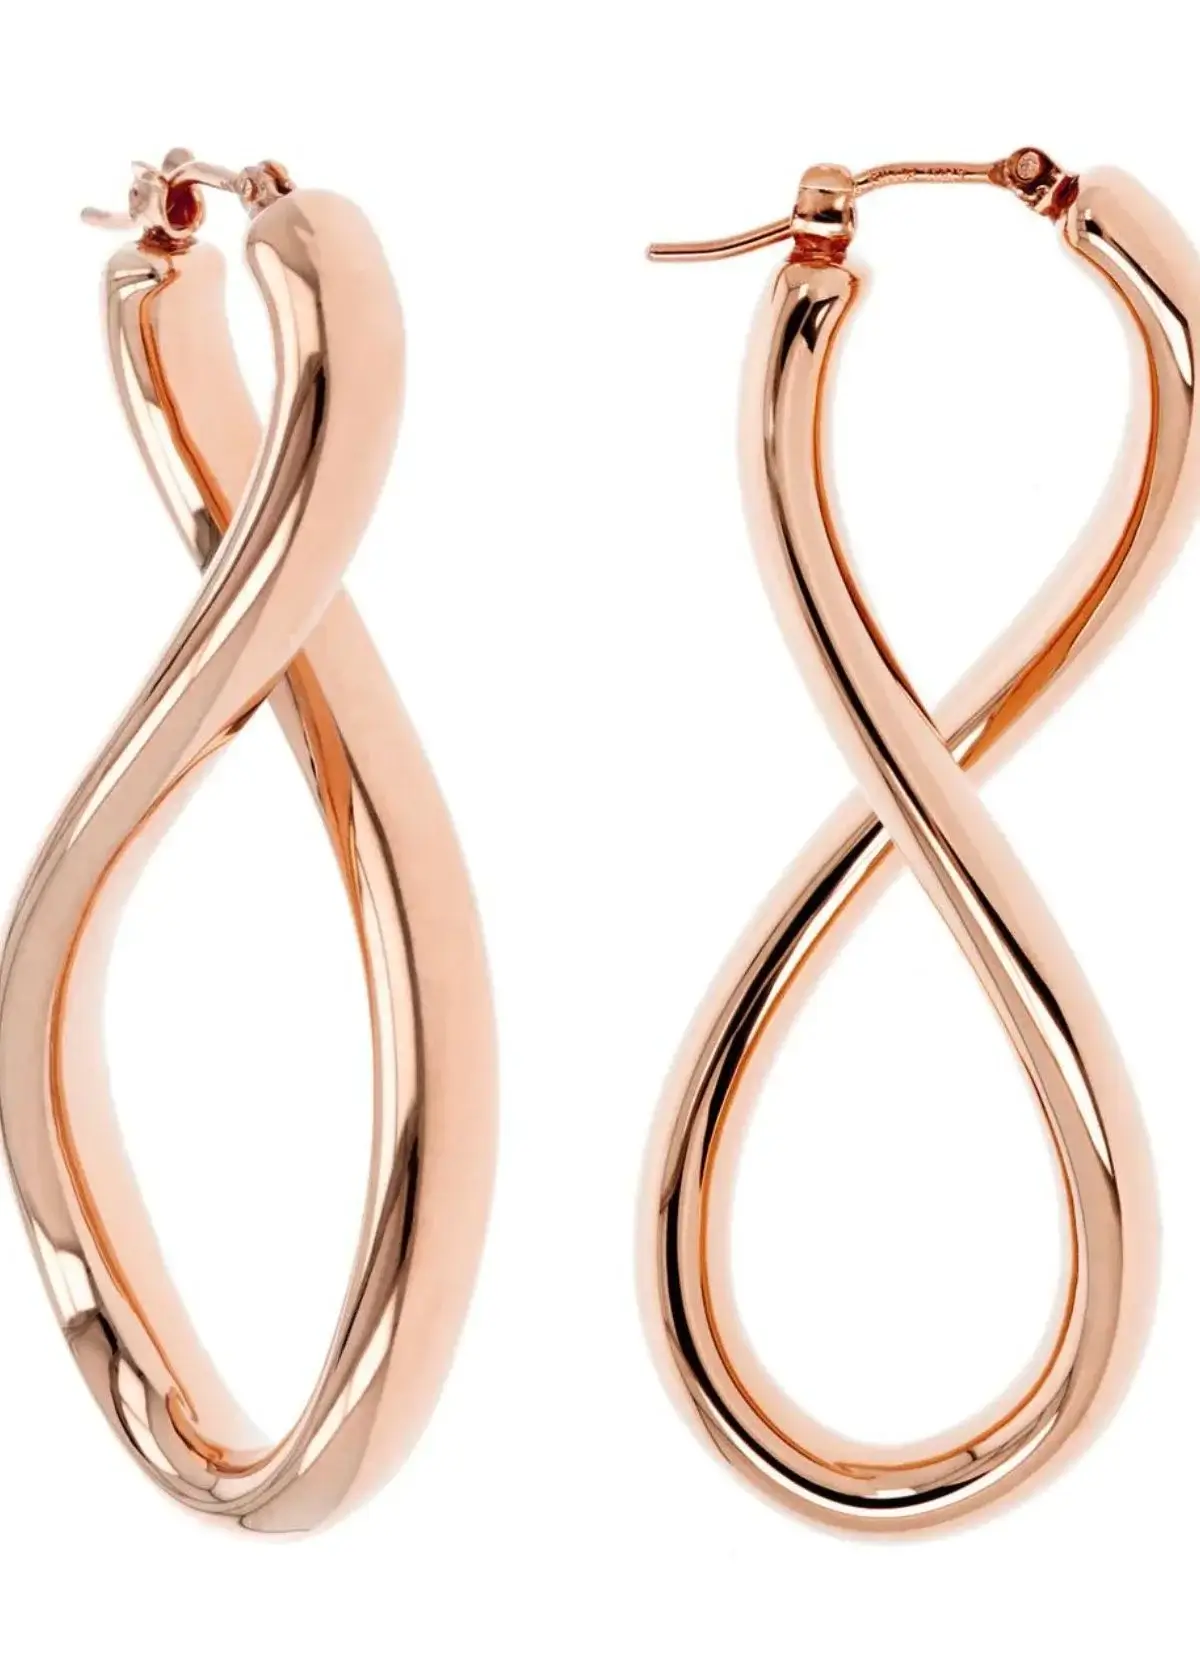 Do Twist Earrings have any Special meaning Or Symbolism?